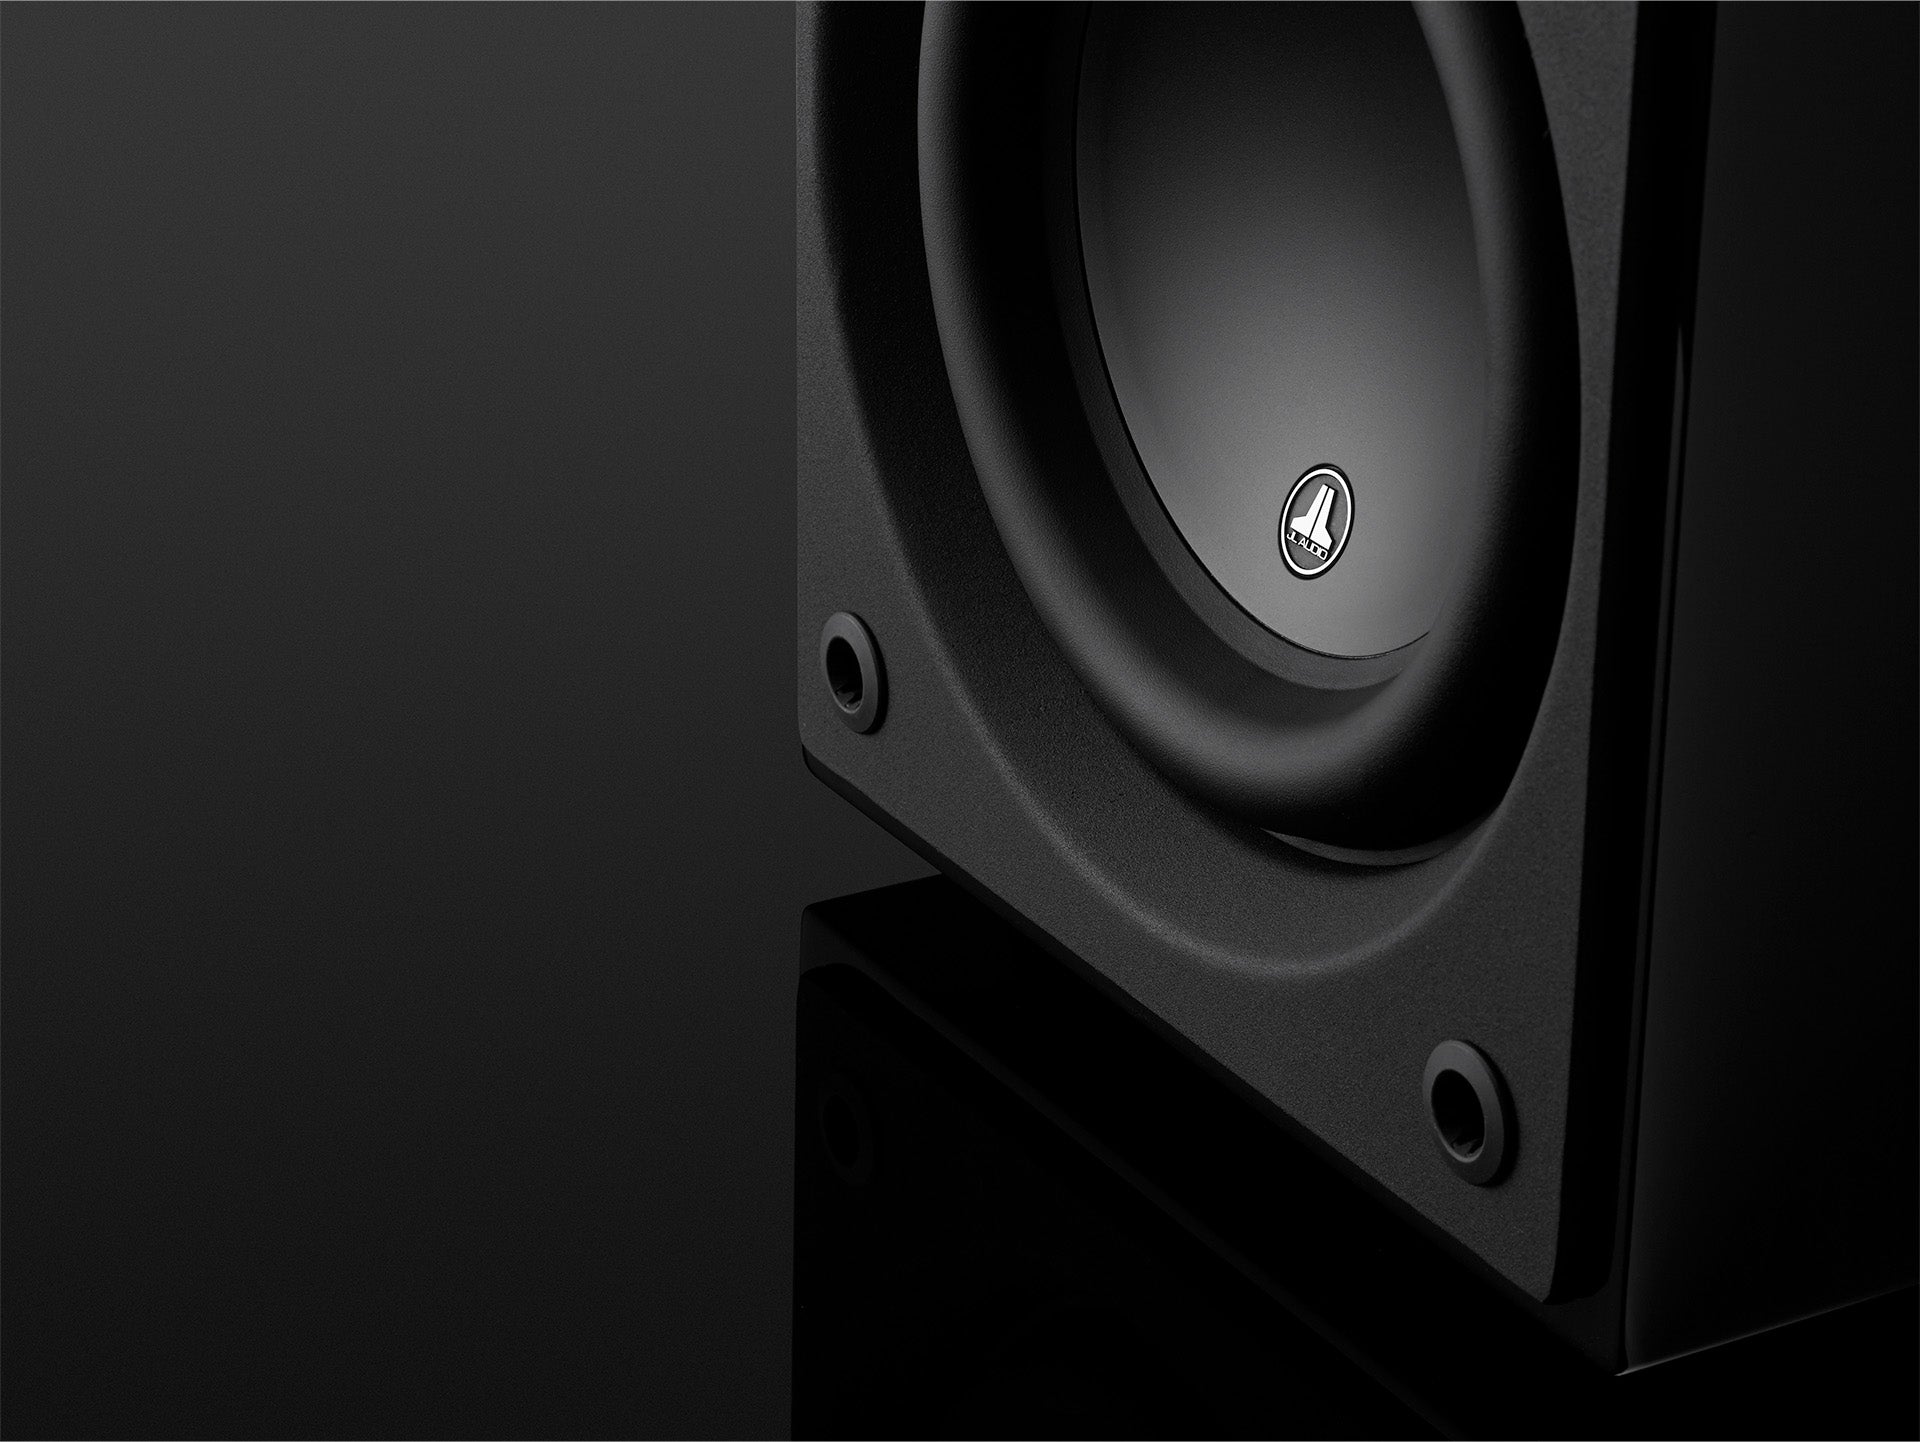 Close-up view of Dominion d110 subwoofer gloss finish.